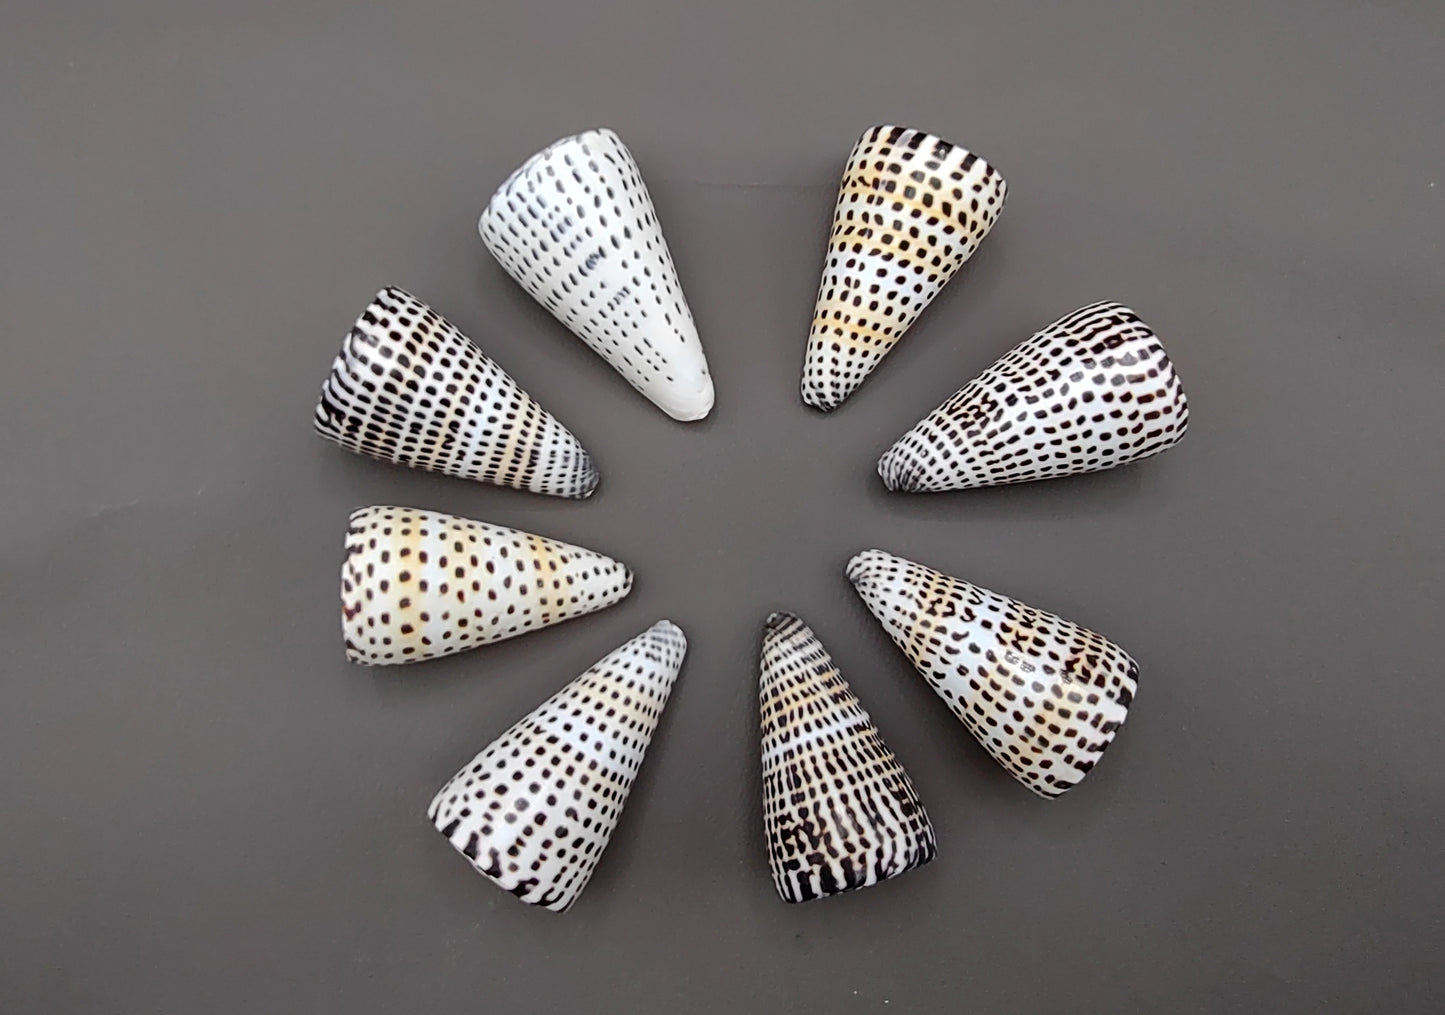 Lettered/Alphabet Cone Seashell - Conus Litteratus - (1 shell approx. 3-4 inches). one multi row and spotted shell. Copyright 2022 SeaShellSupply.com.